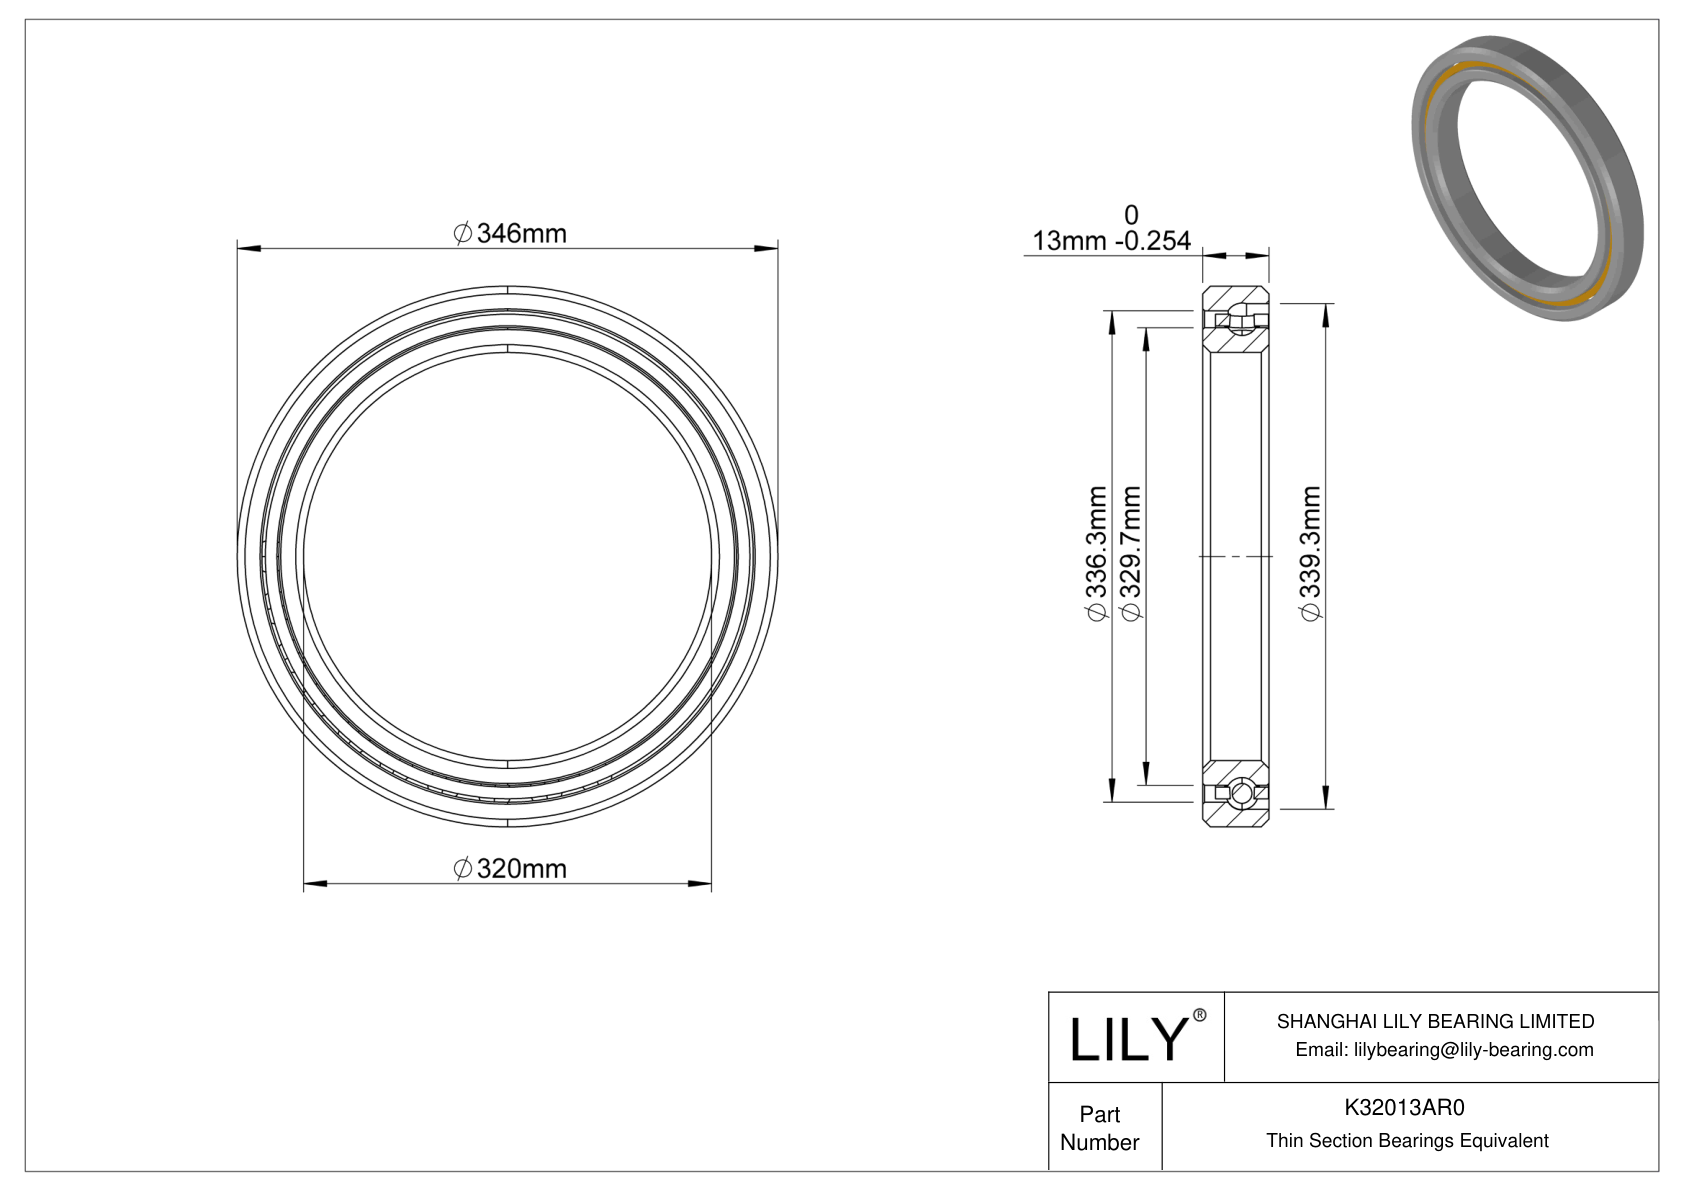 K32013AR0 Constant Section (CS) Bearings cad drawing